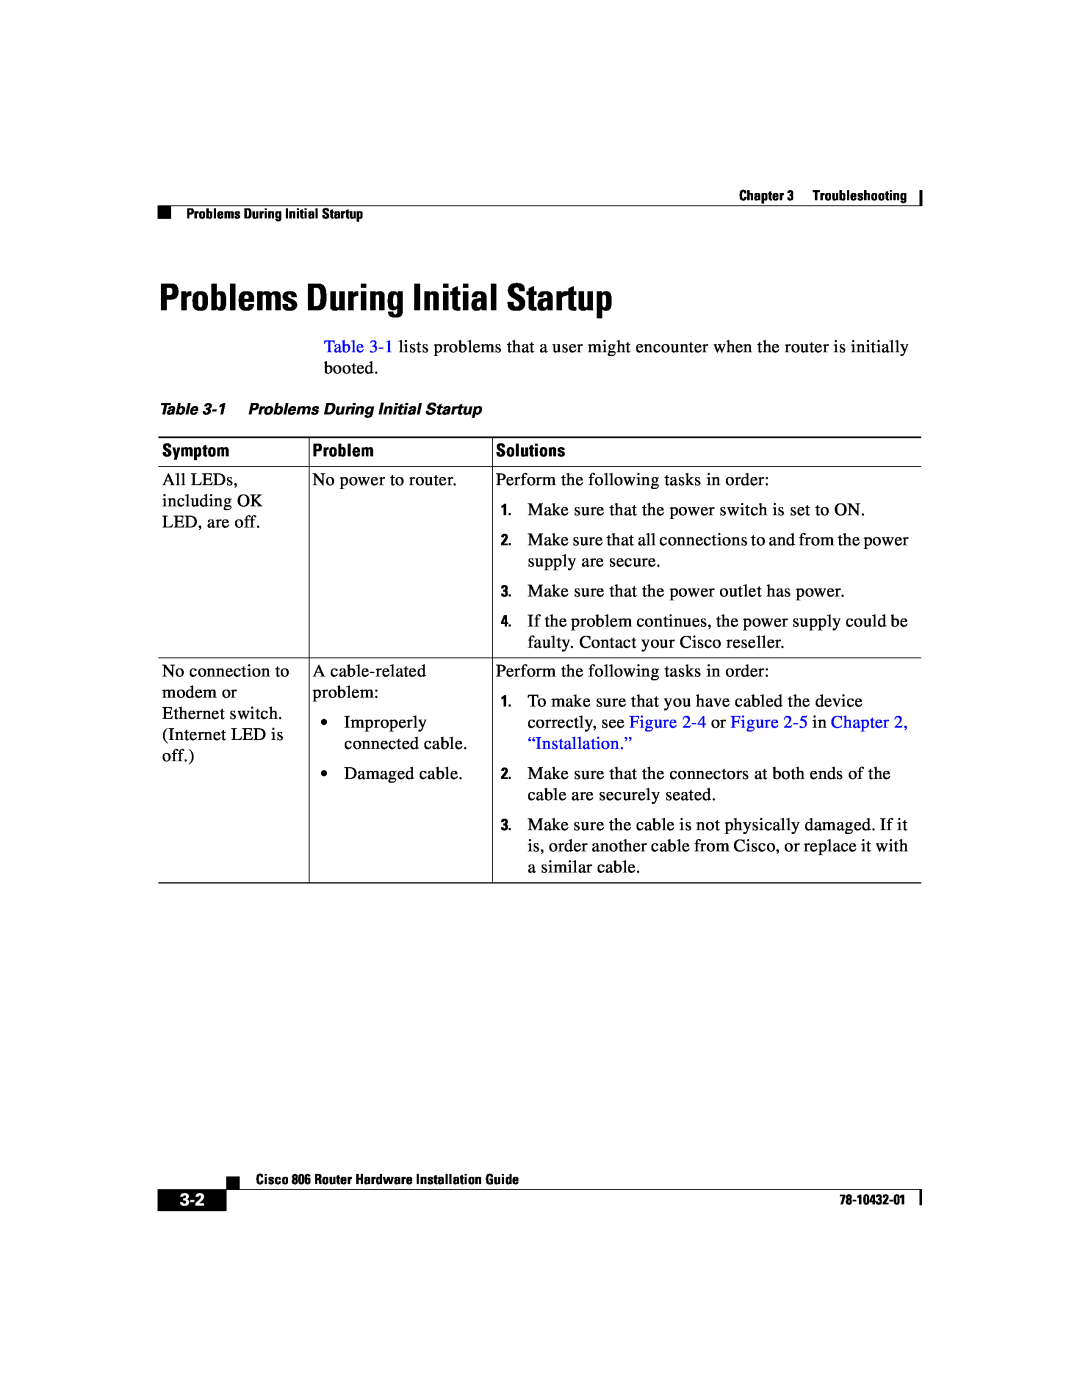 Cisco Systems 806 Problems During Initial Startup, correctly, see -4 or -5 in Chapter, “Installation.”, Symptom, Solutions 